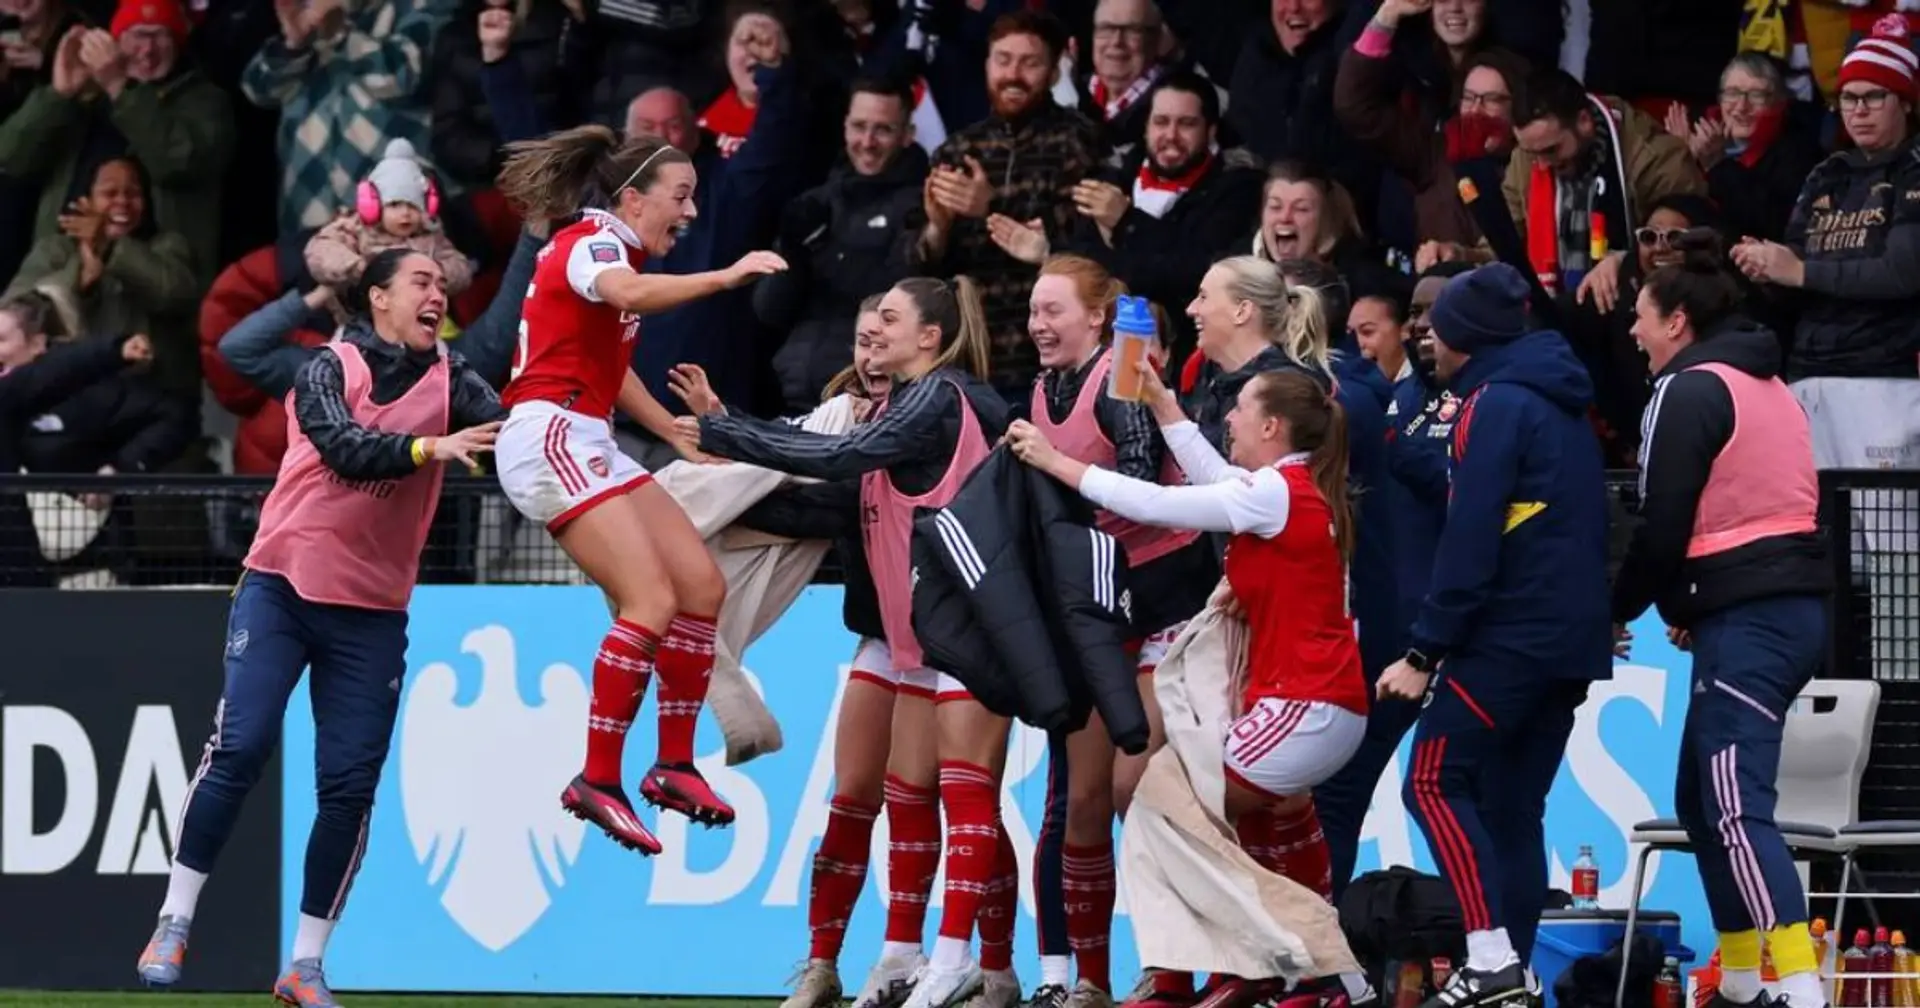 Arsenal Women win 2-1 to end Man City's 14-game unbeaten run and stay in title race